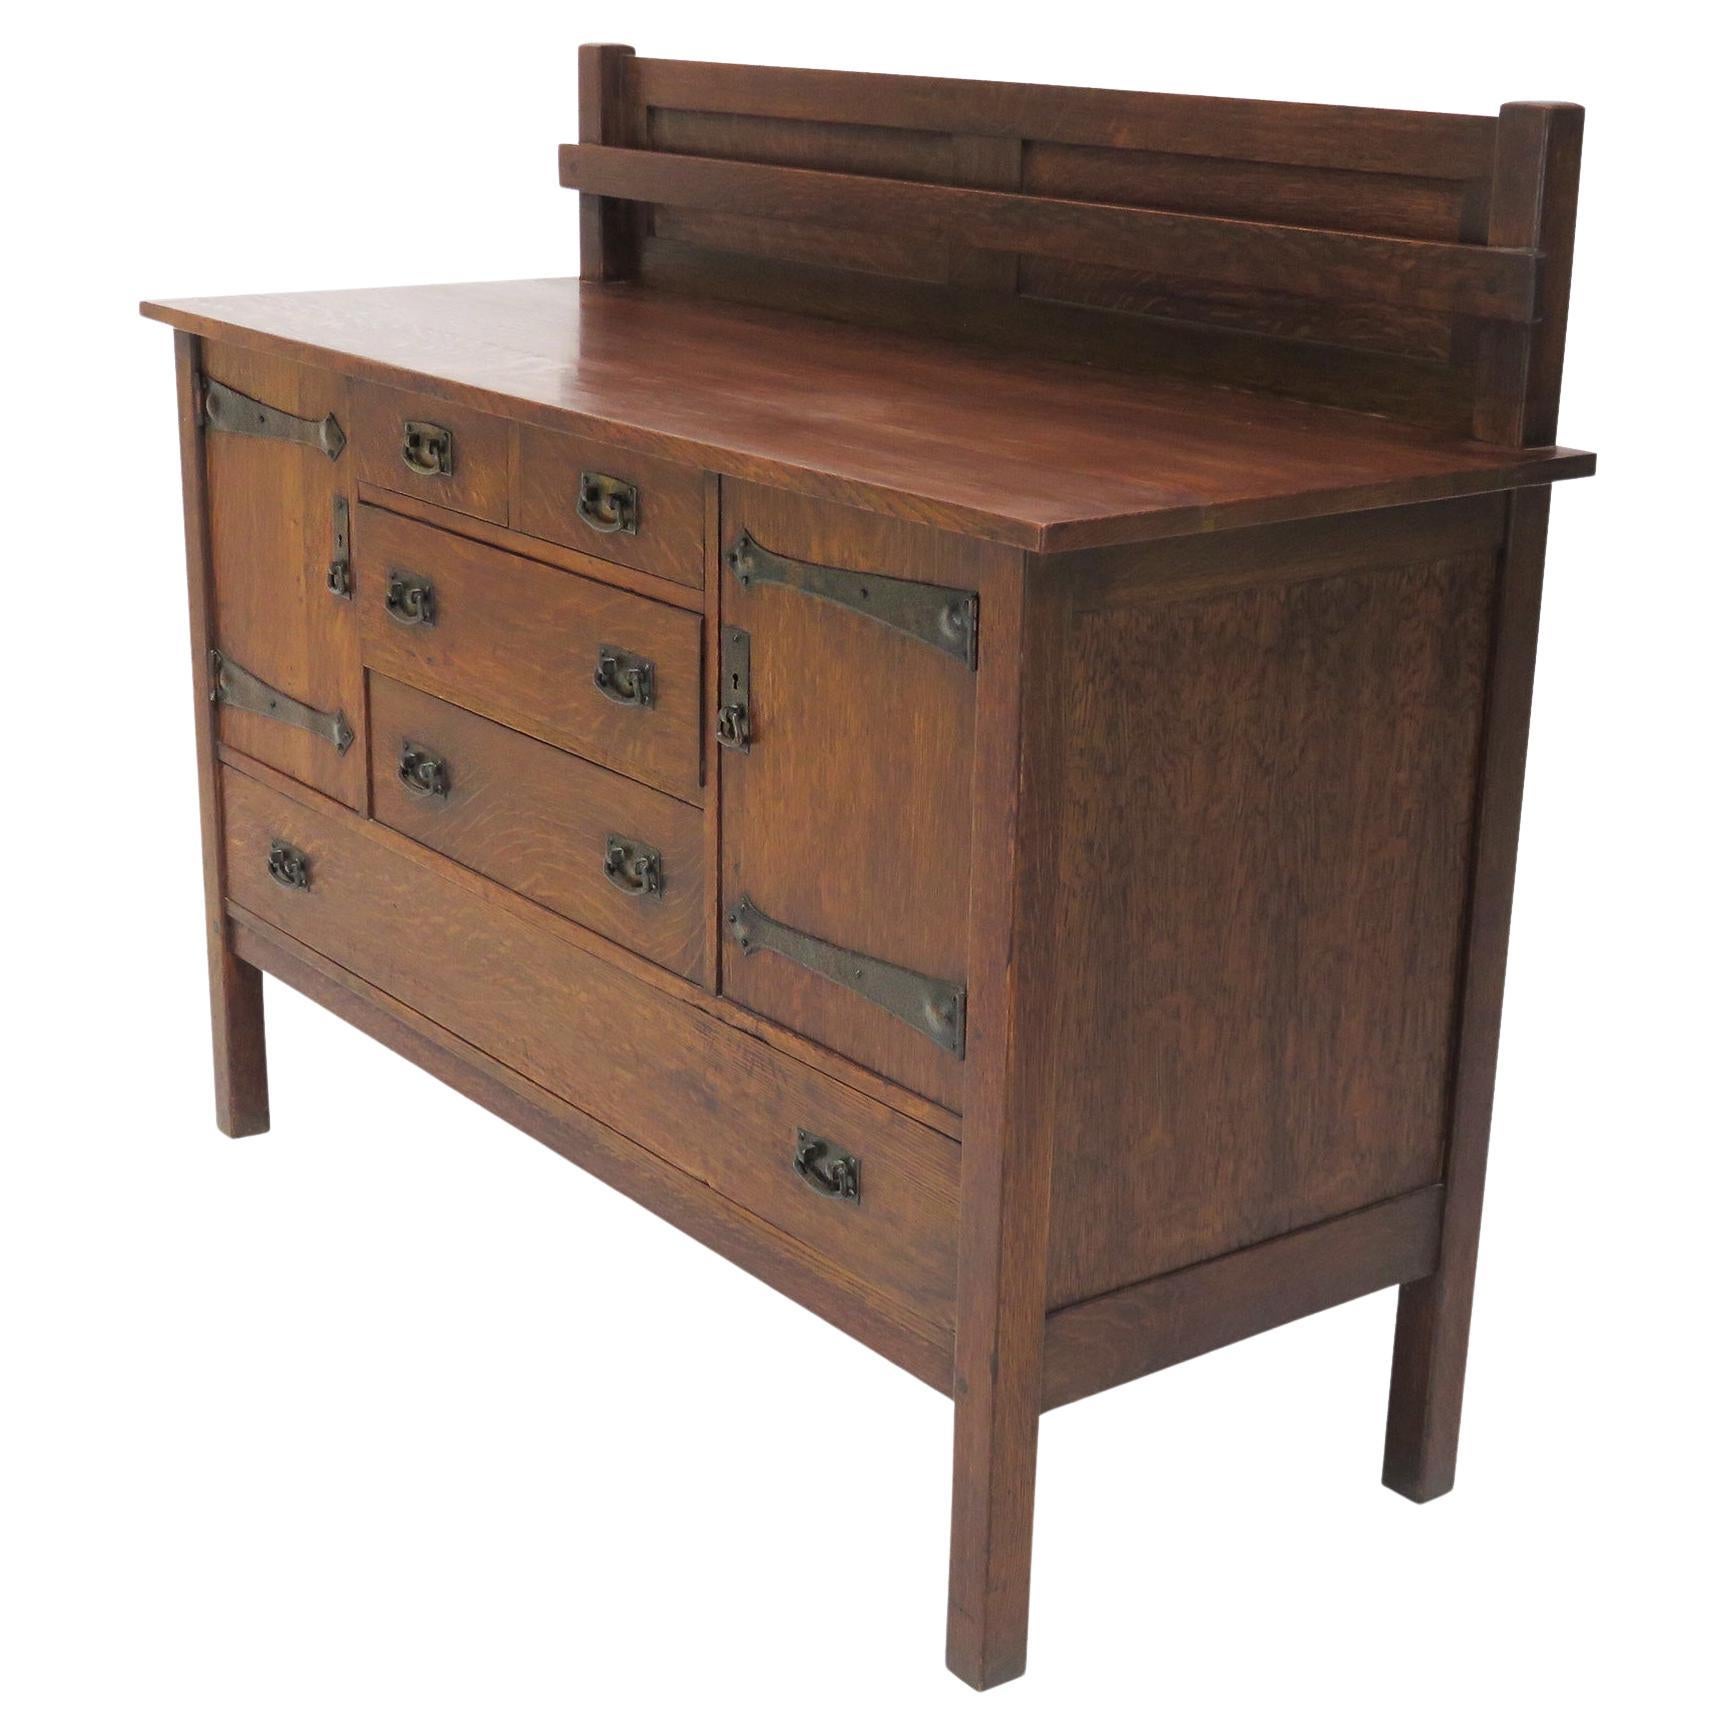 Is Stickley a good furniture brand?